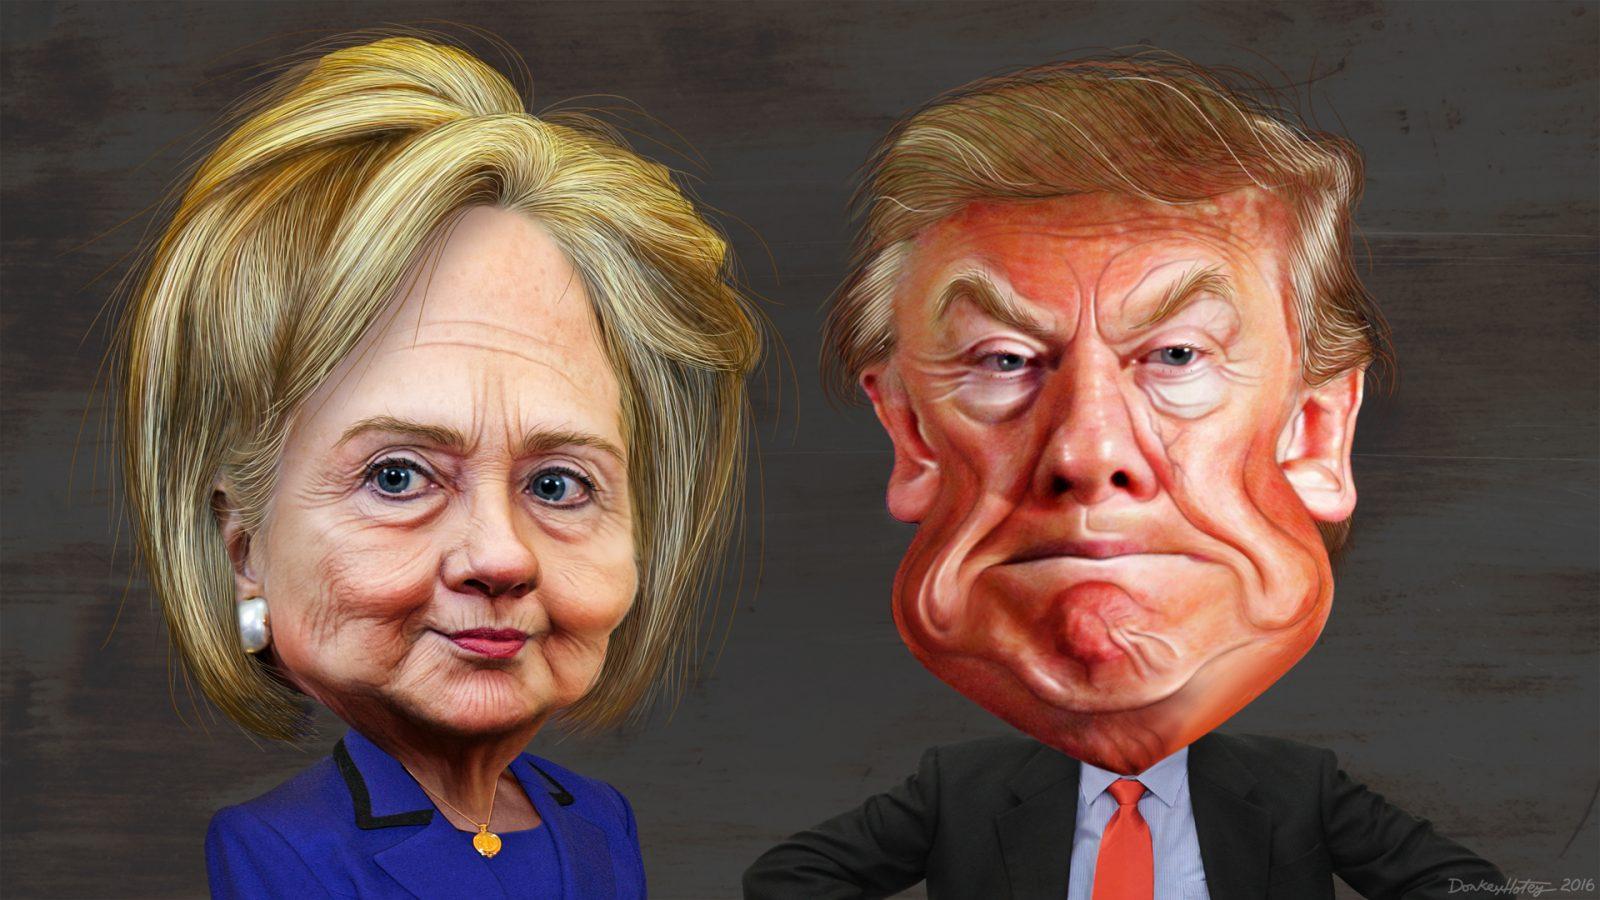 Caricatures of Clinton and Trump are popular throughout election season. Photo courtesy of Flickr user Donkey Hotey.